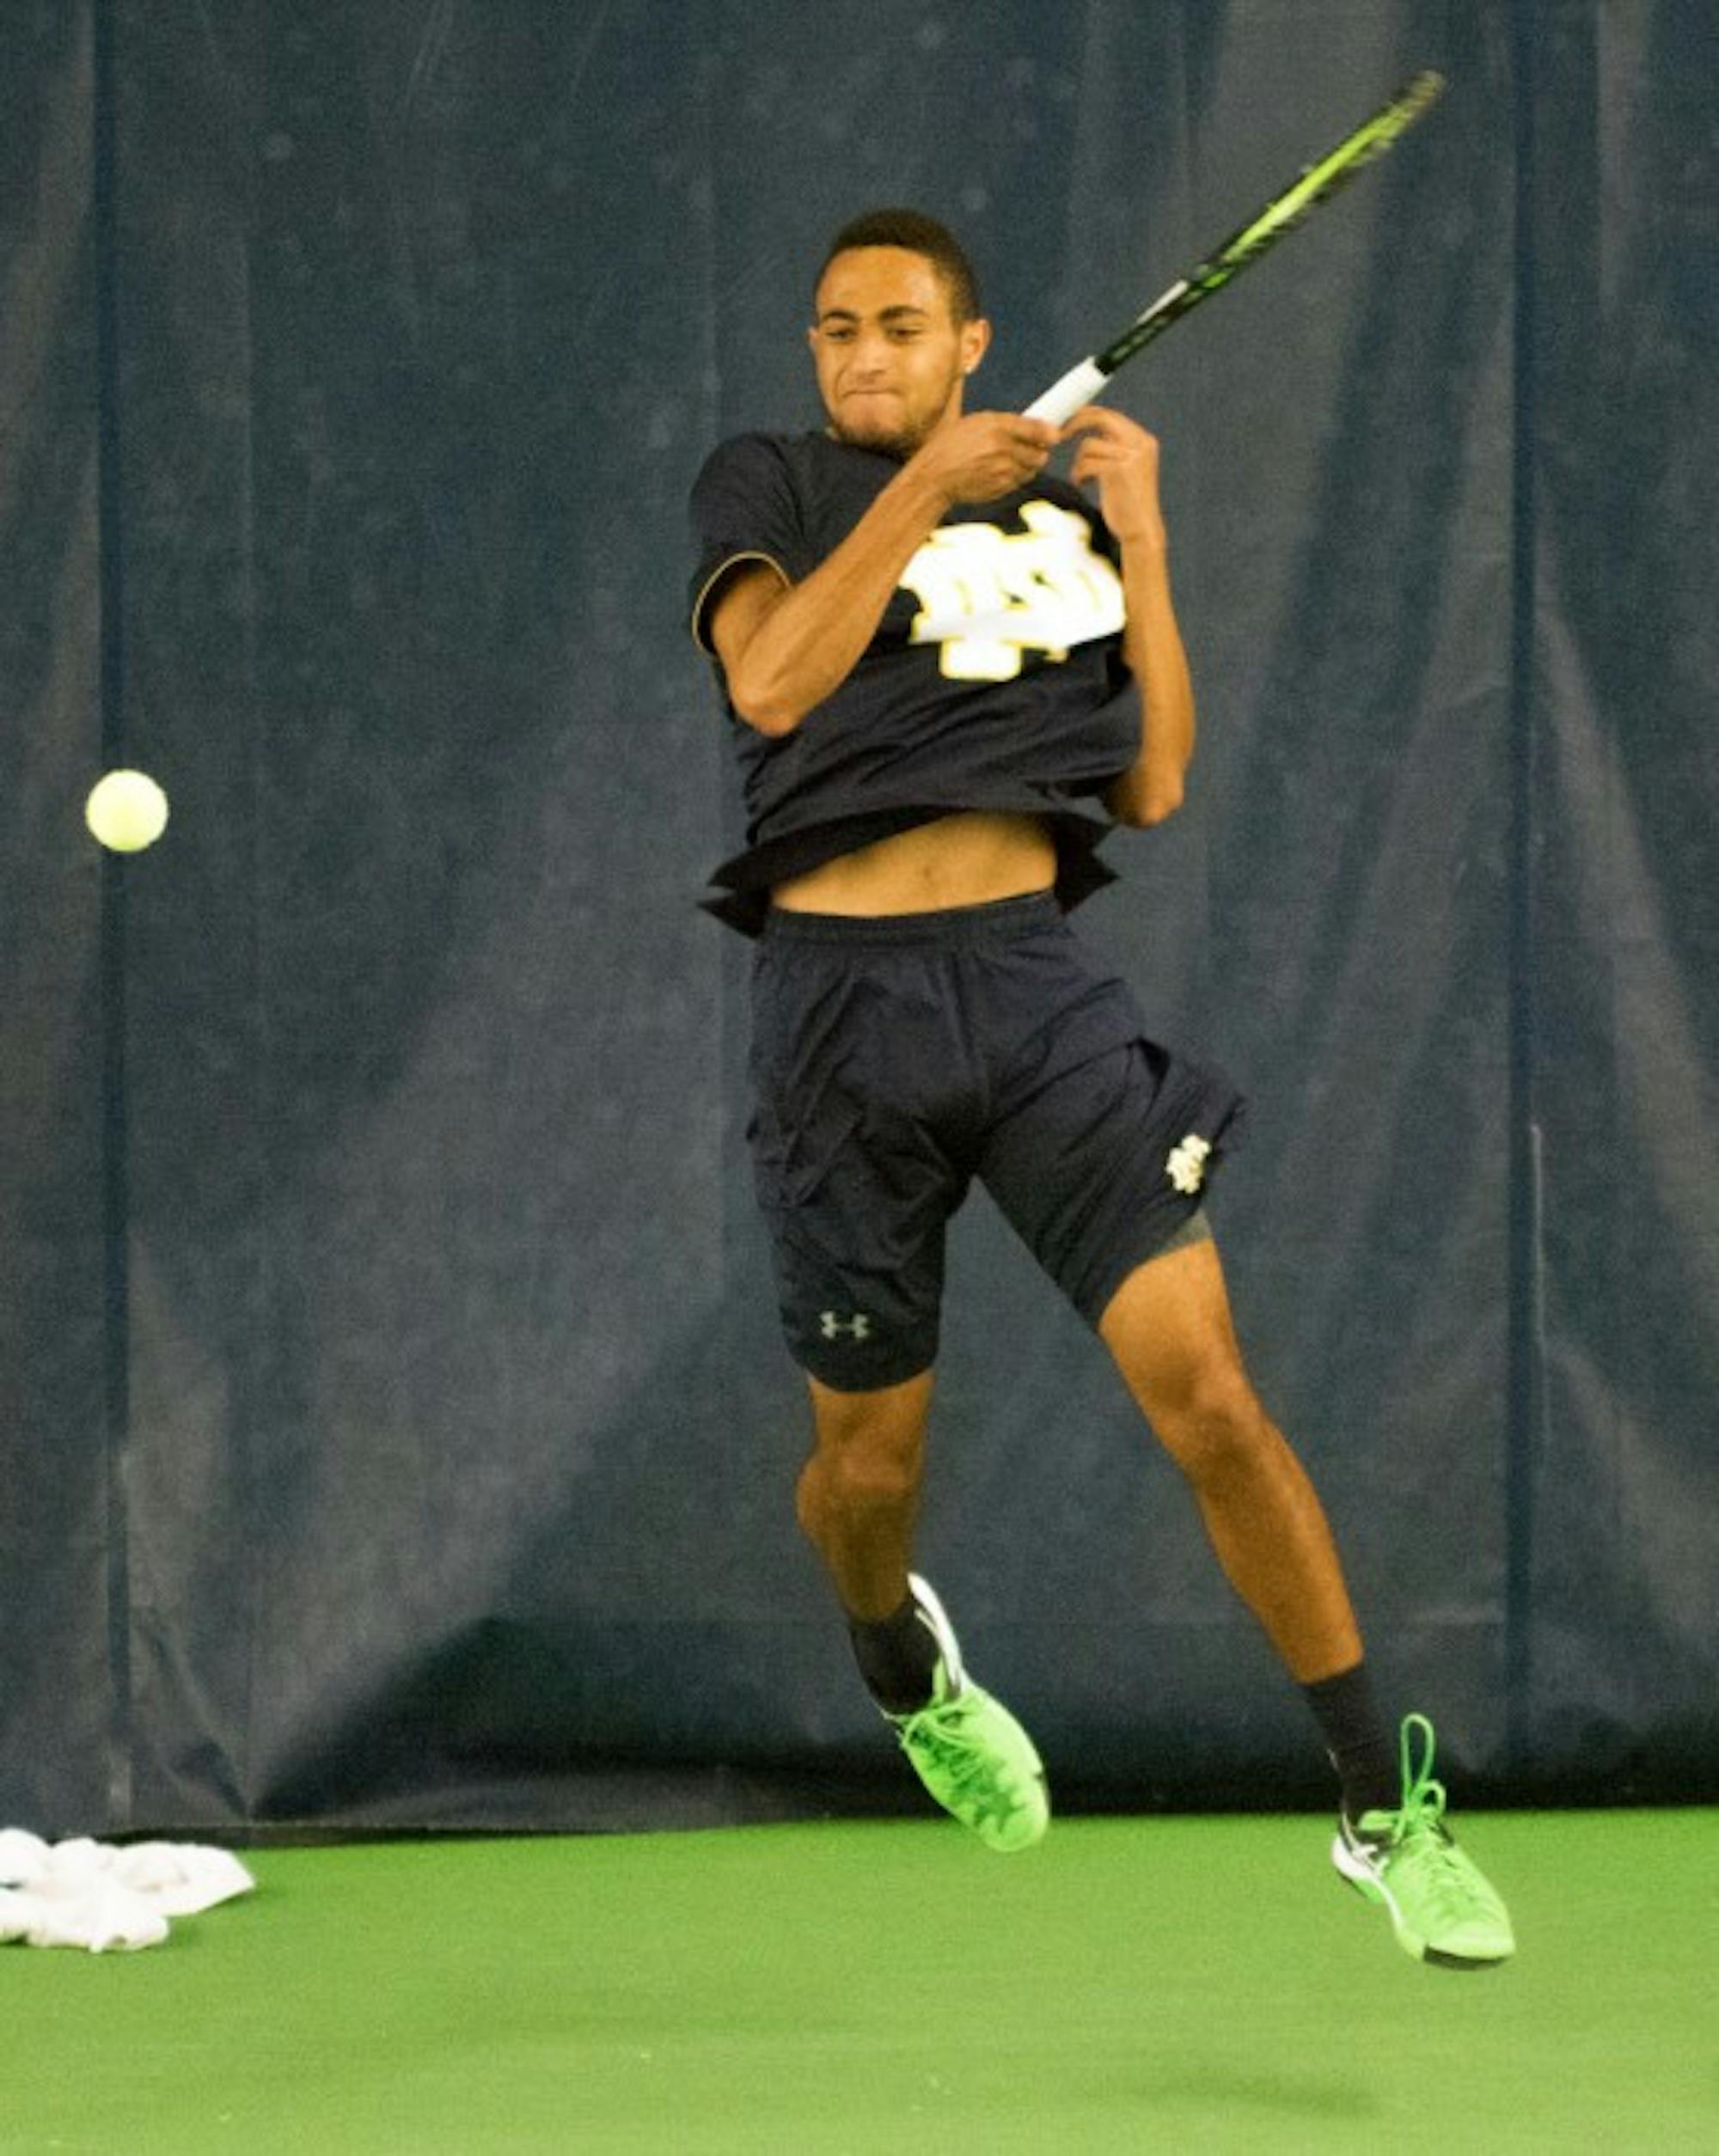 Sophomore Grayson Broadus returns a server in Notre Dame's 5-2 win over Duke on March 18 at Eck Tennis Pavilion.